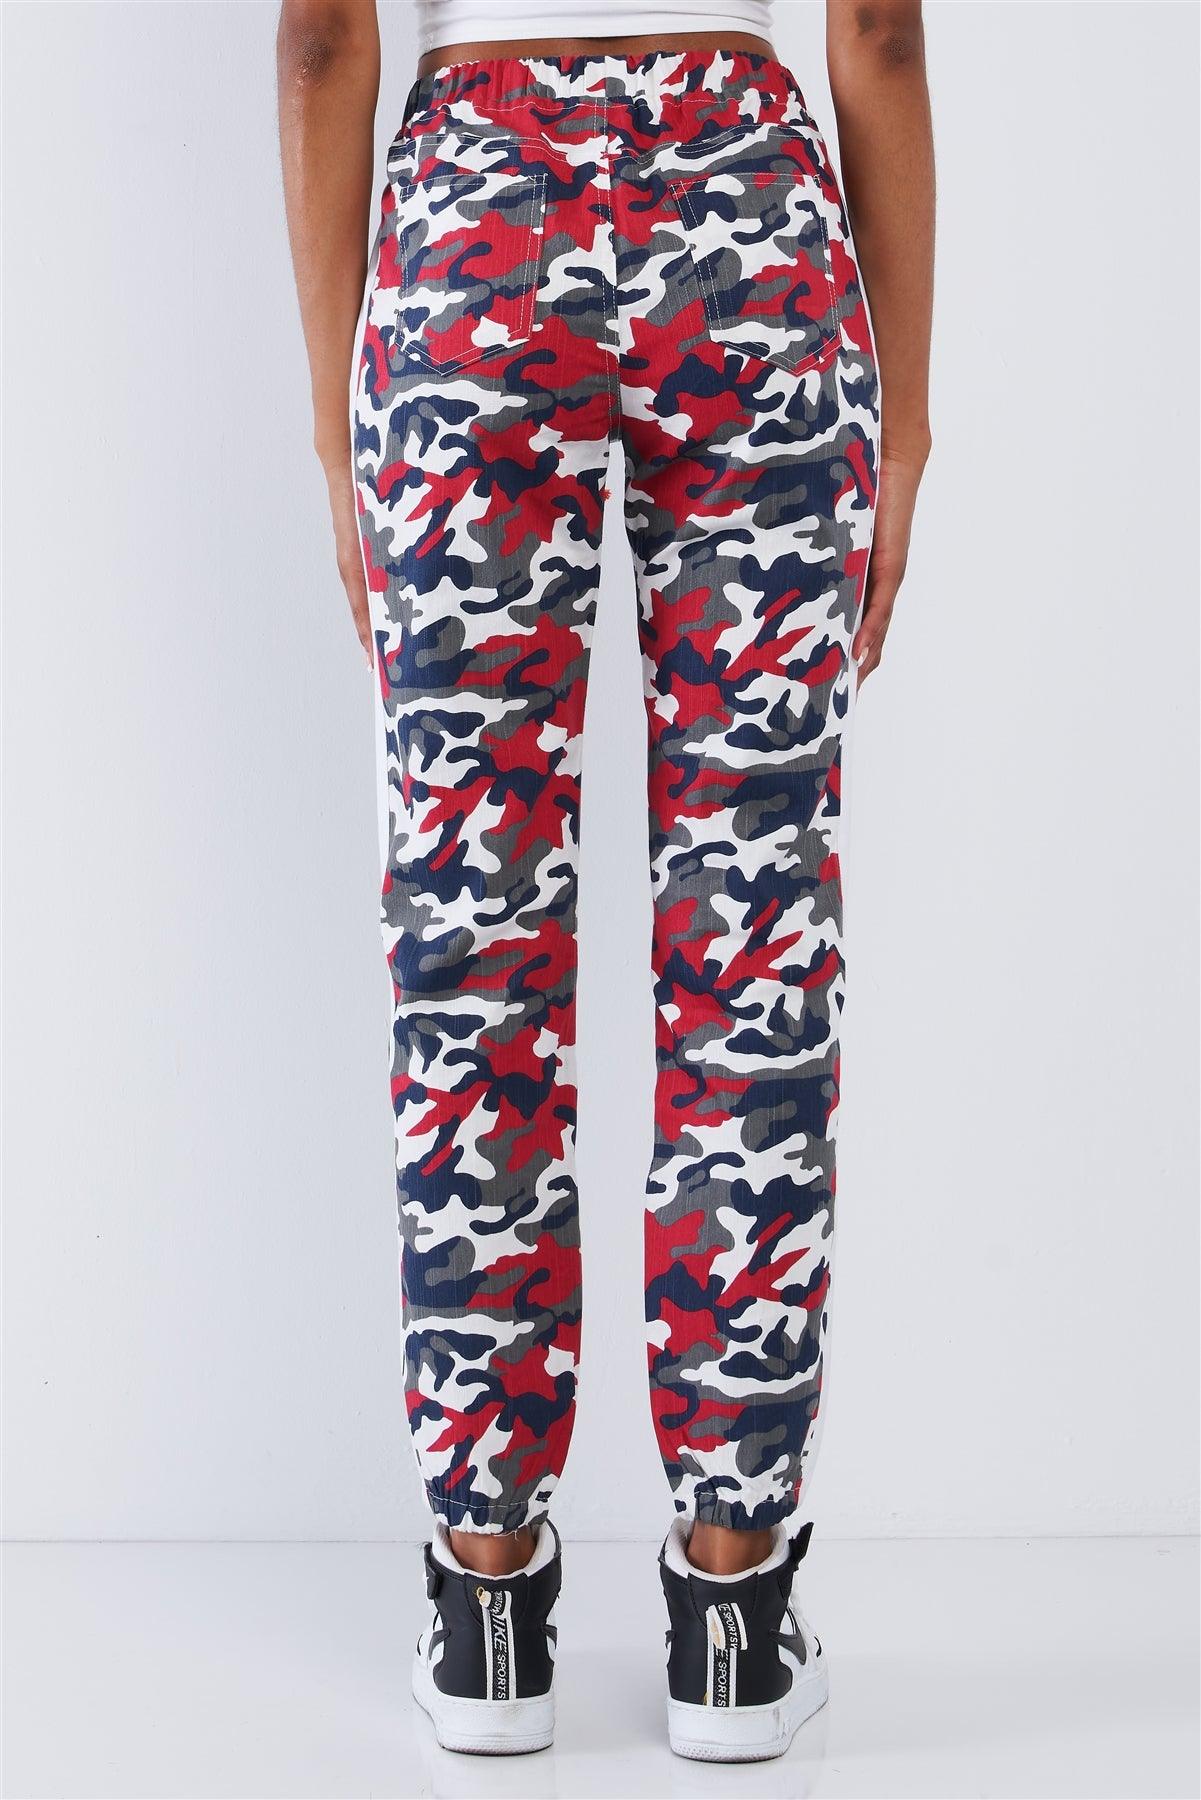 Red & Blue Camouflage High Waisted White Side Striped Elastic Waist Draw String Cargo Pants